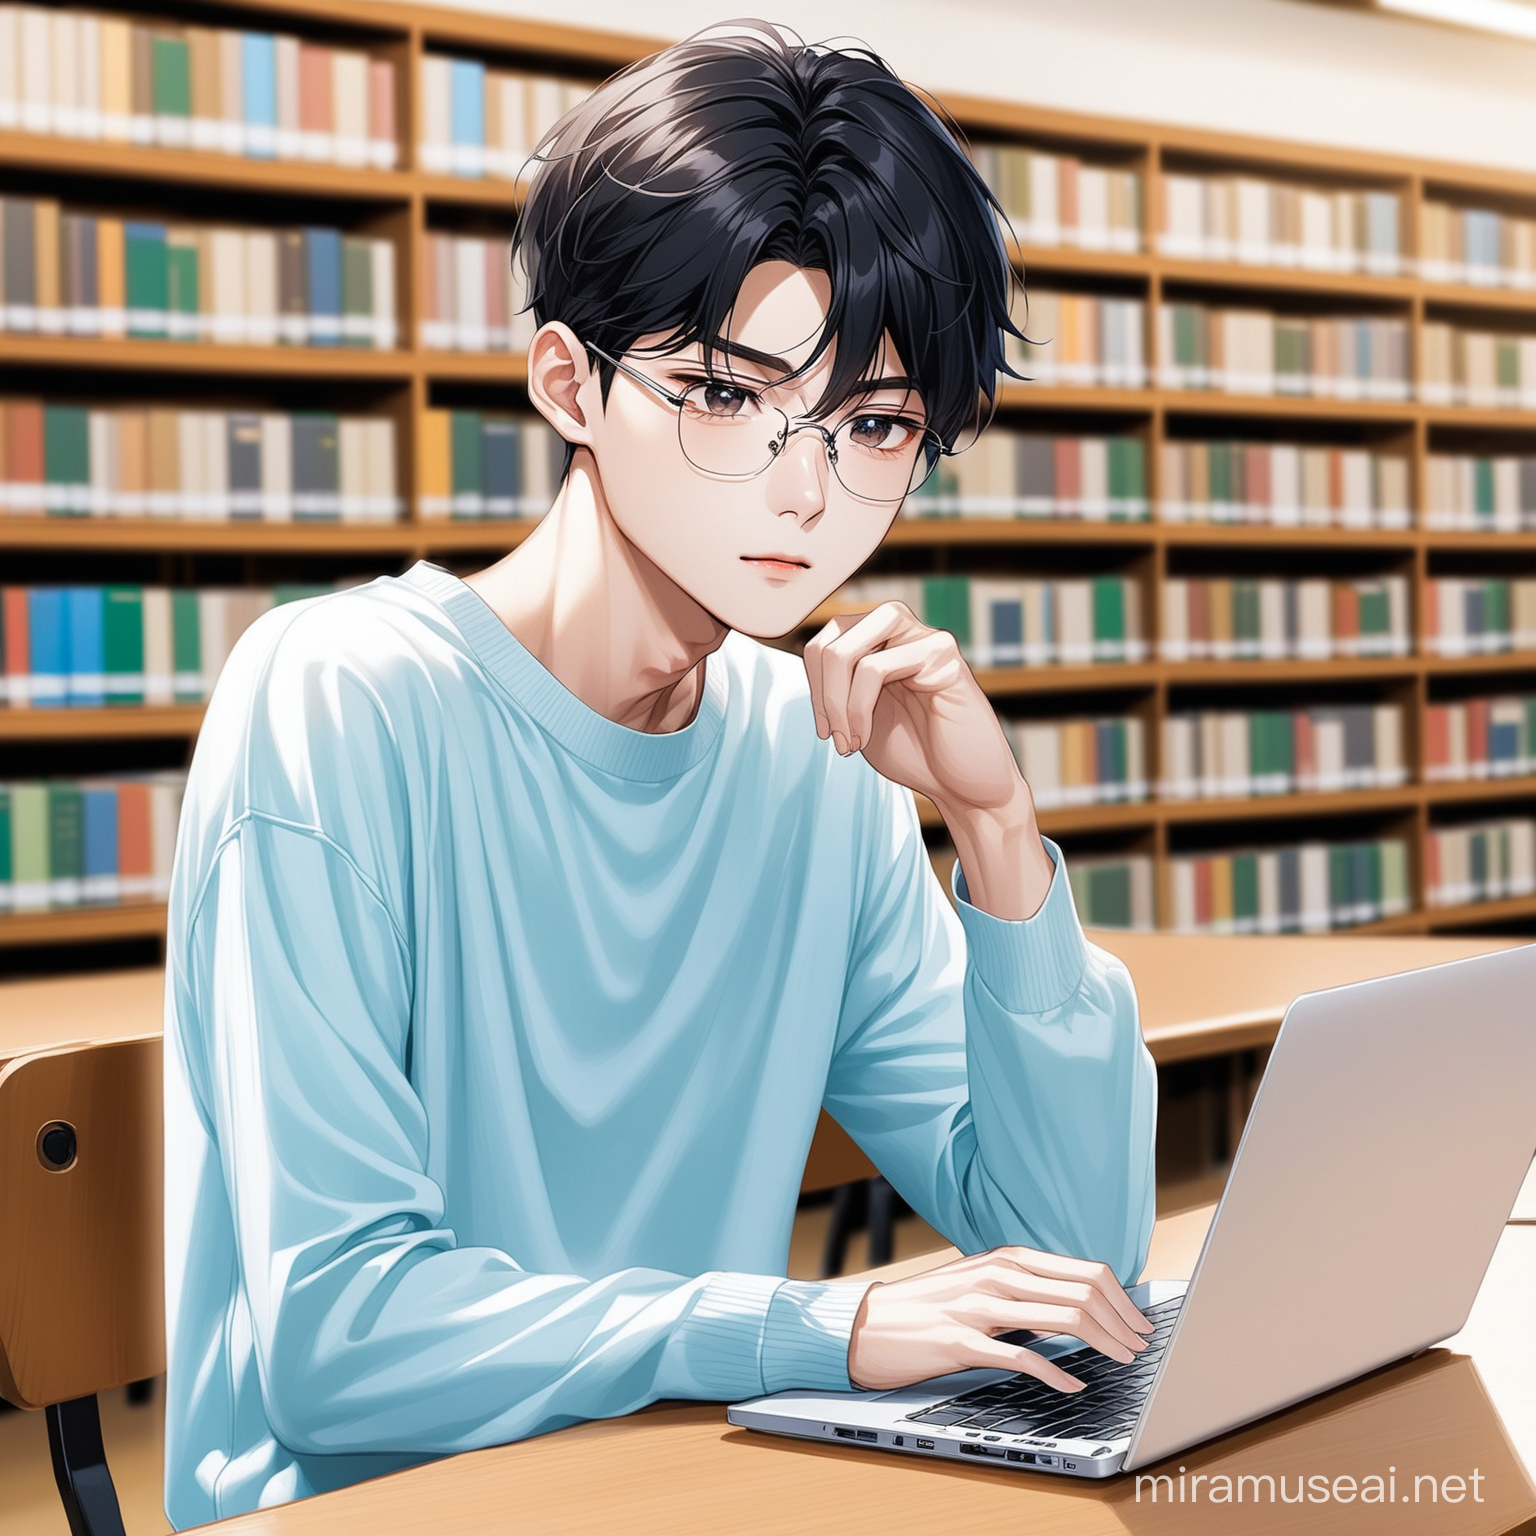 Korean Actor Inspired Cha Eun Woo Persona Studying in Library